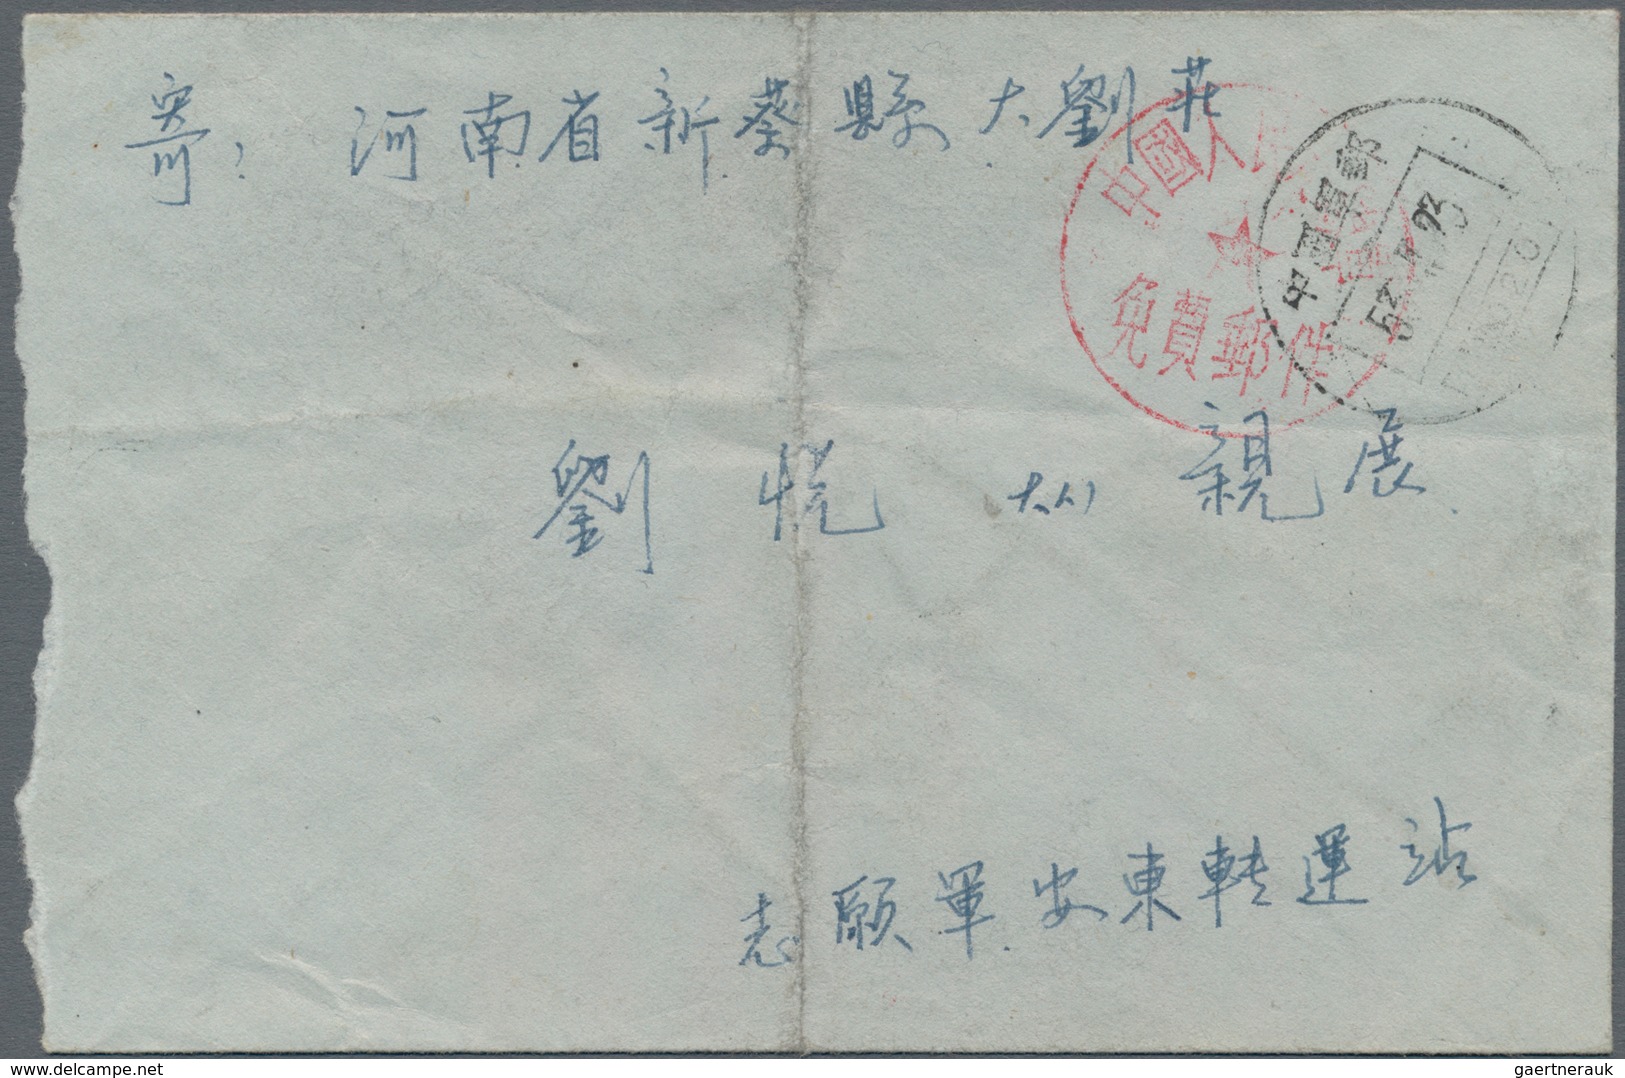 China - Militärpostmarken: 1951/57, 4 military covers of the "People's Volunteer Army" in Korea, inc